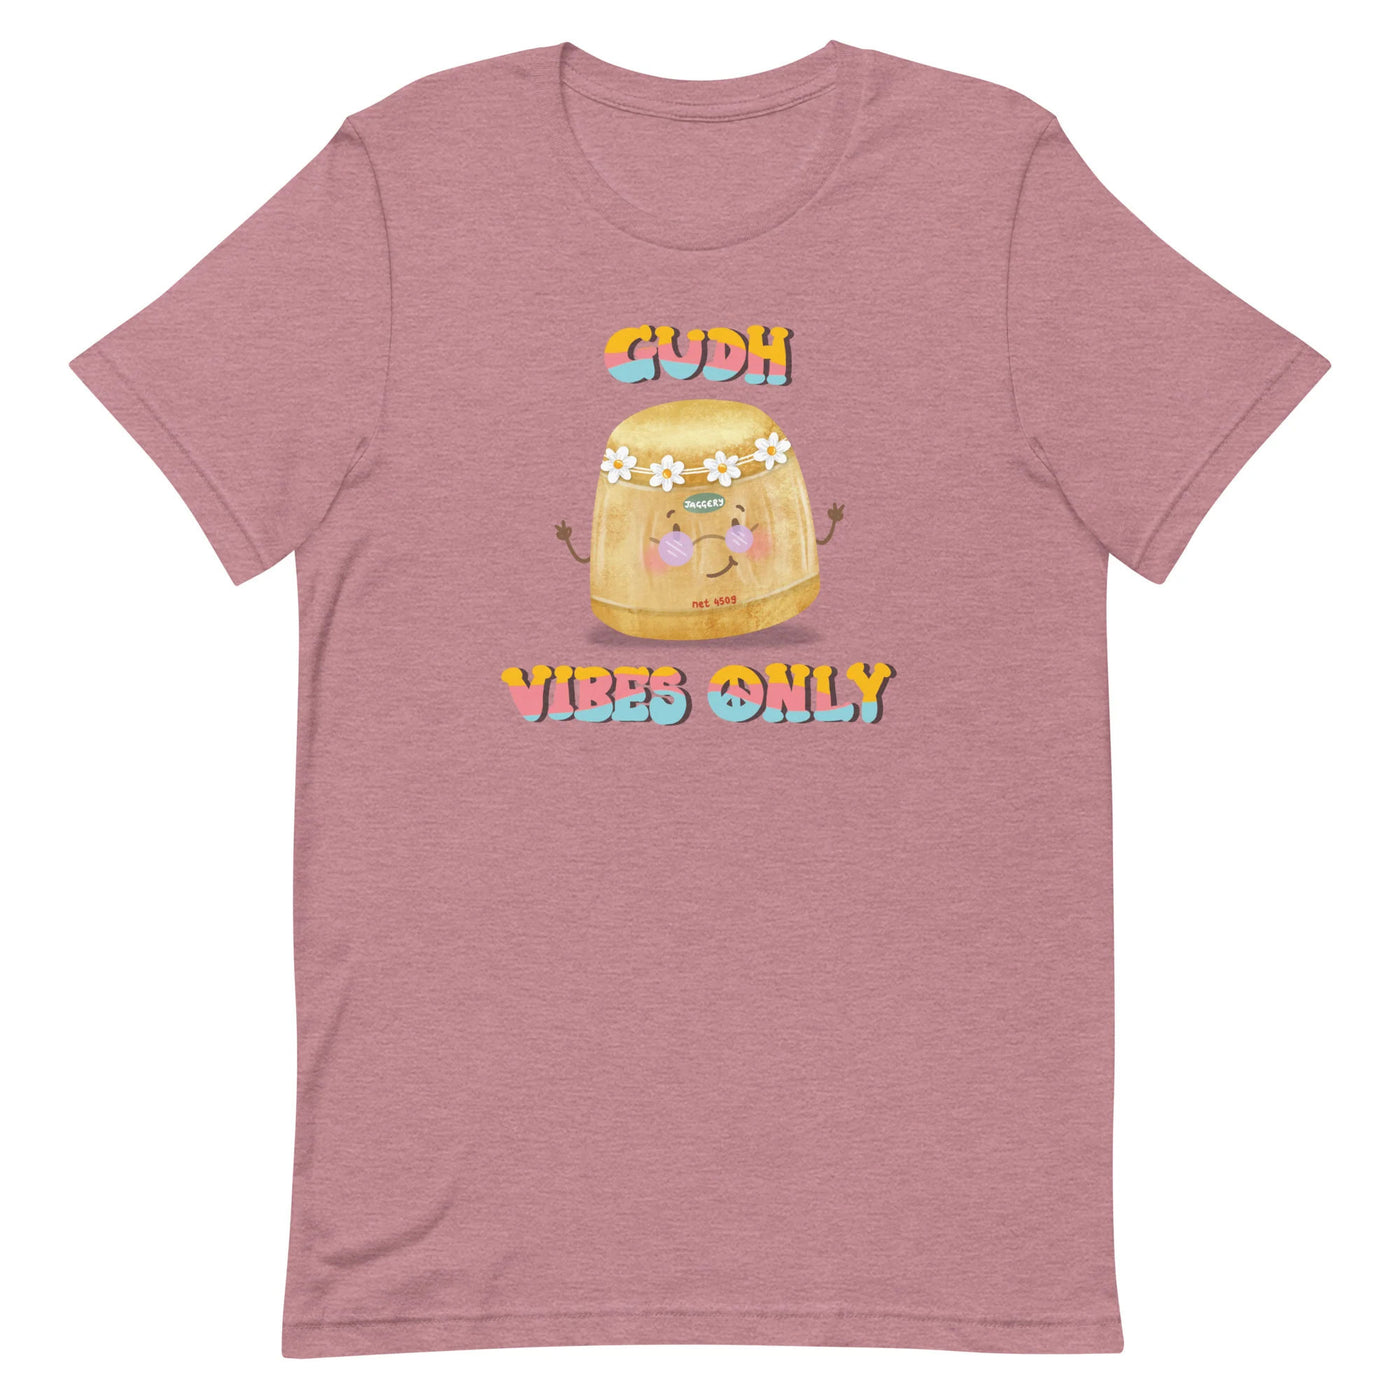 Gudh Vibes Adult T-shirt by The Cute Pista 